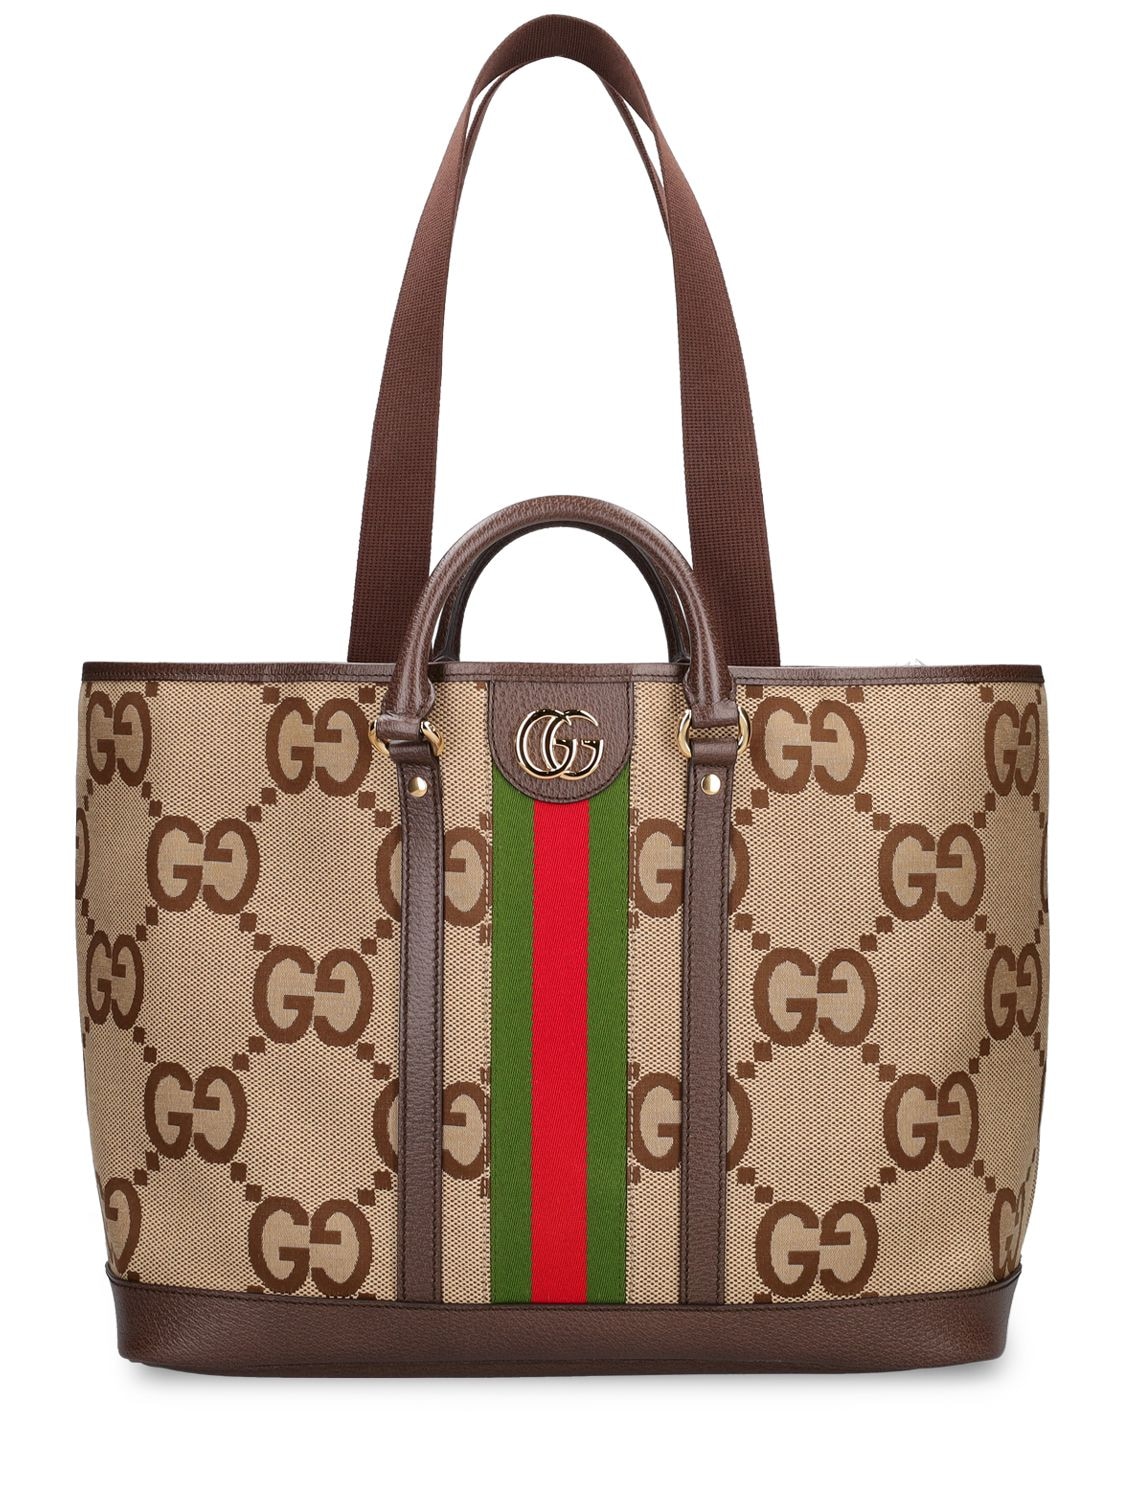 Gucci Gg Jumbo Canvas Tote Bag In Brown